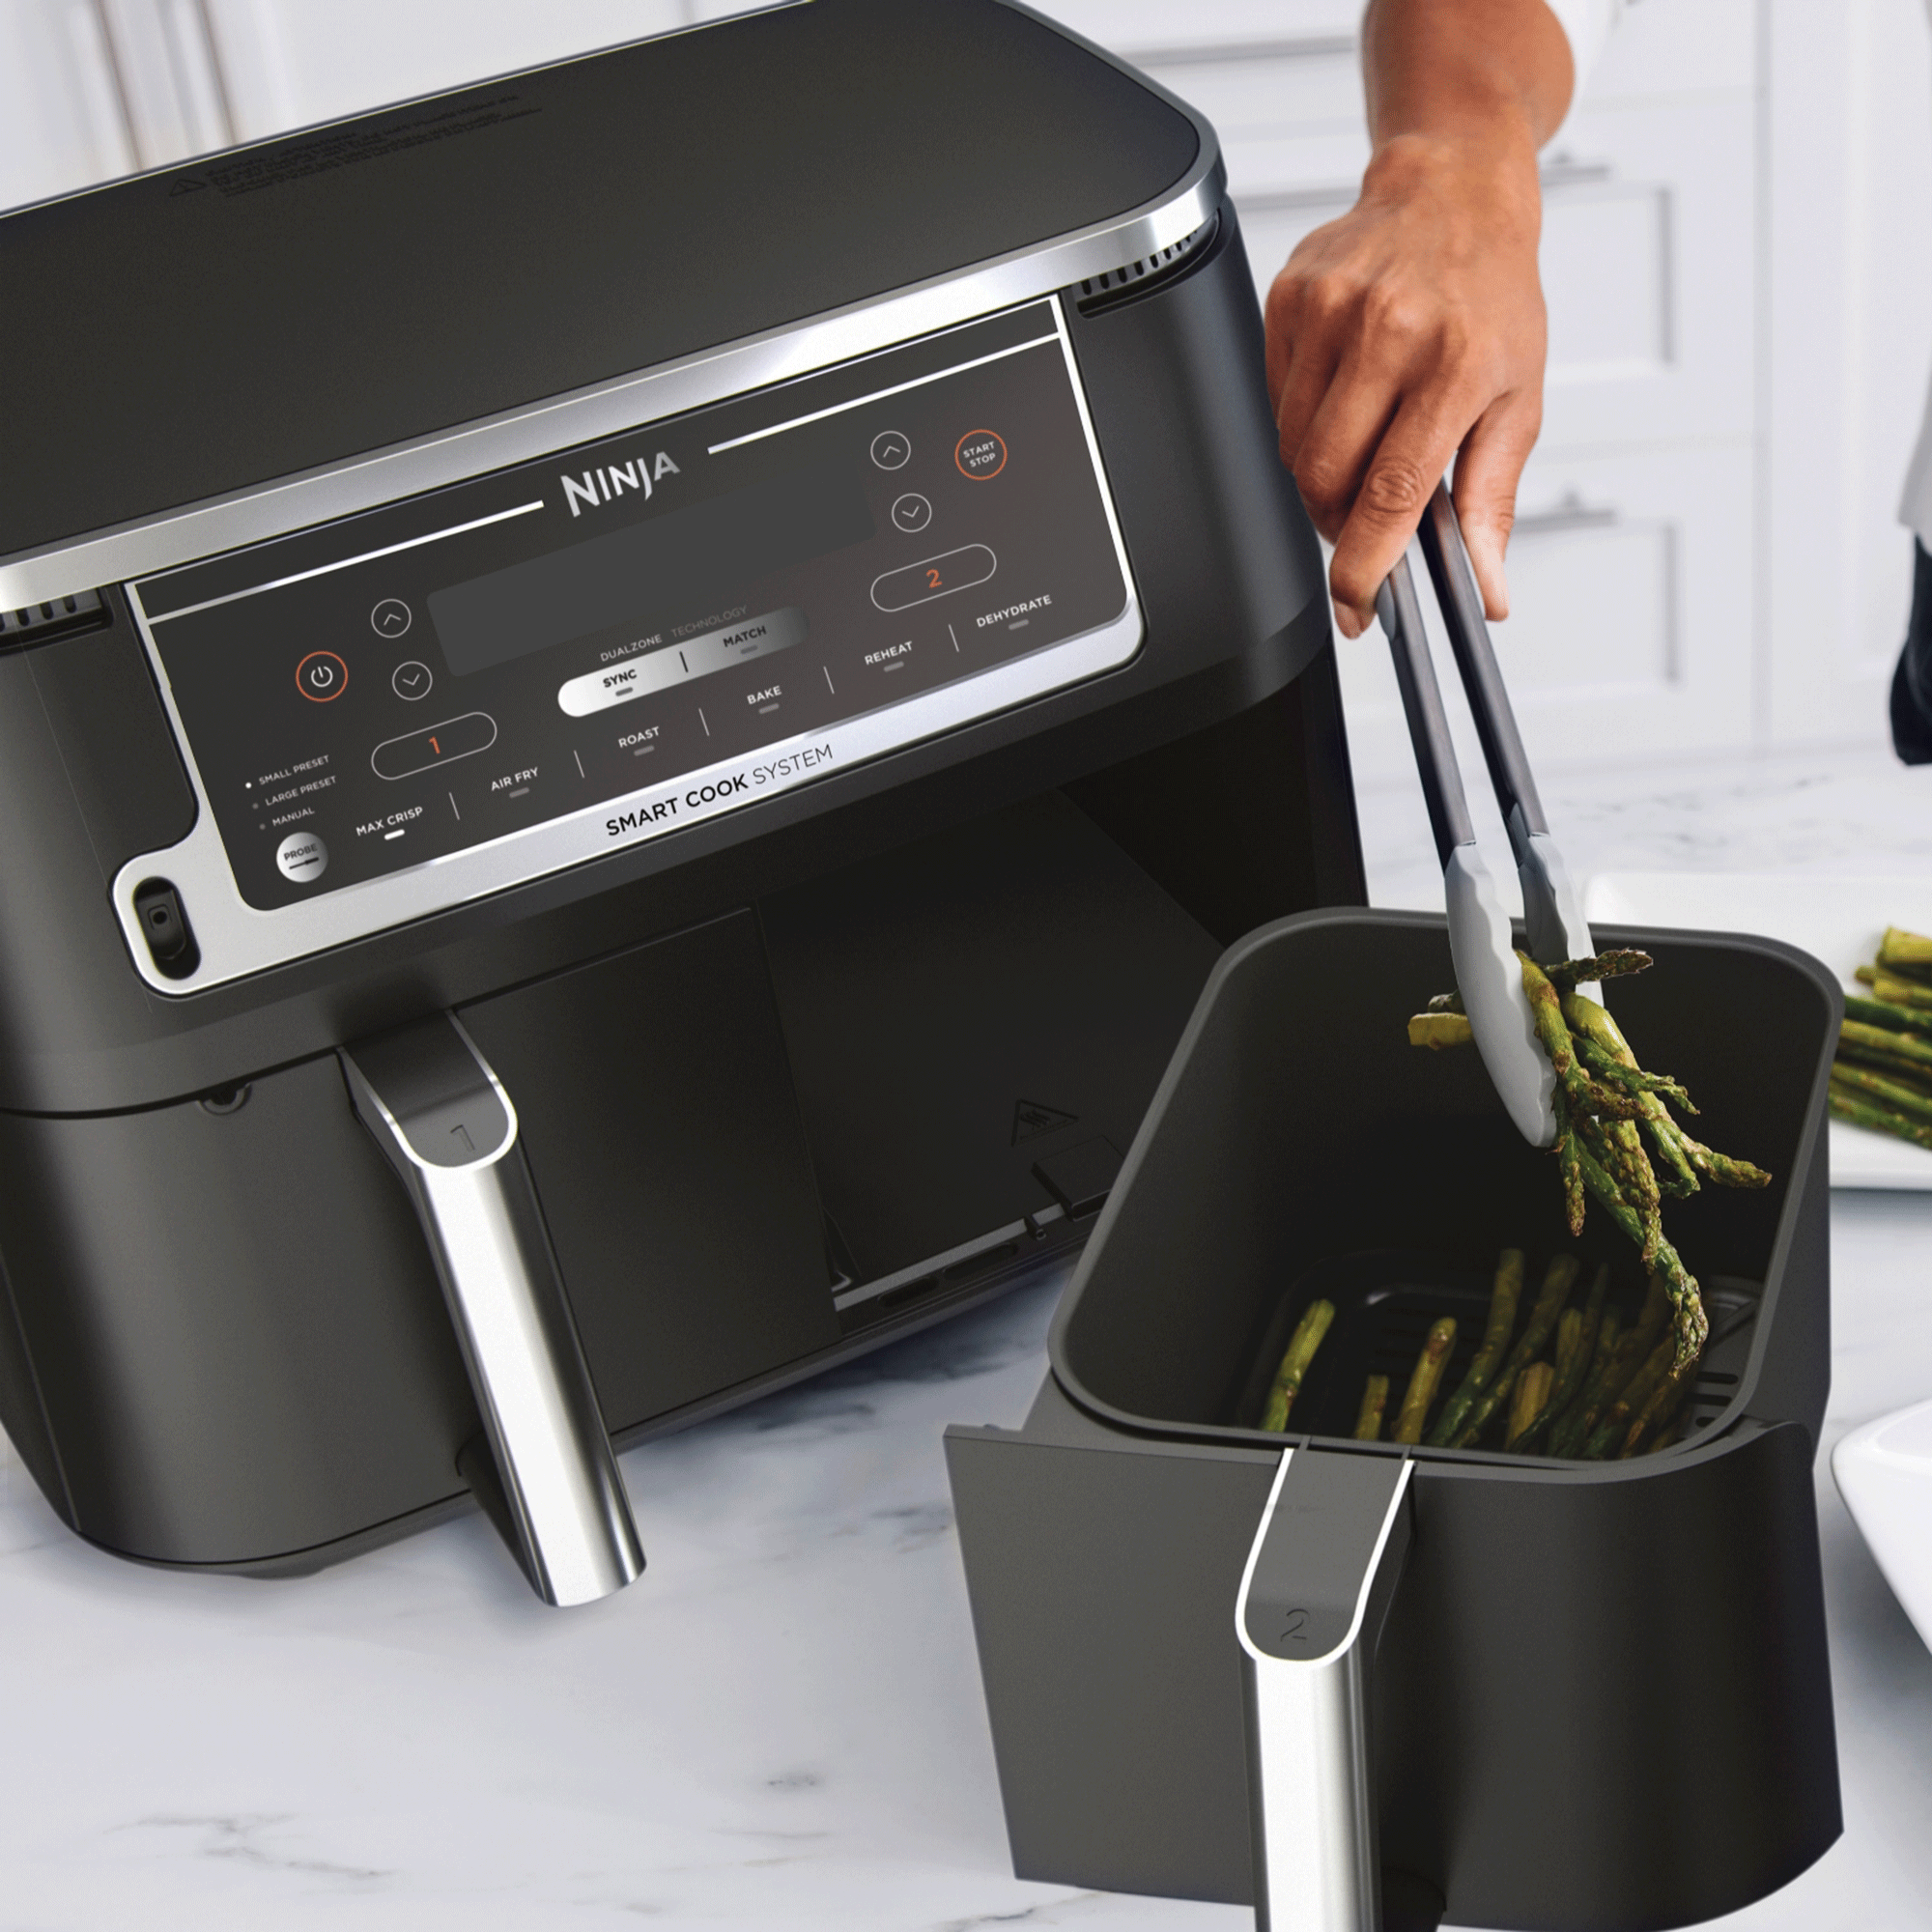 Today Only: QVC Is Offering the Ninja Foodi Double Oven for $240